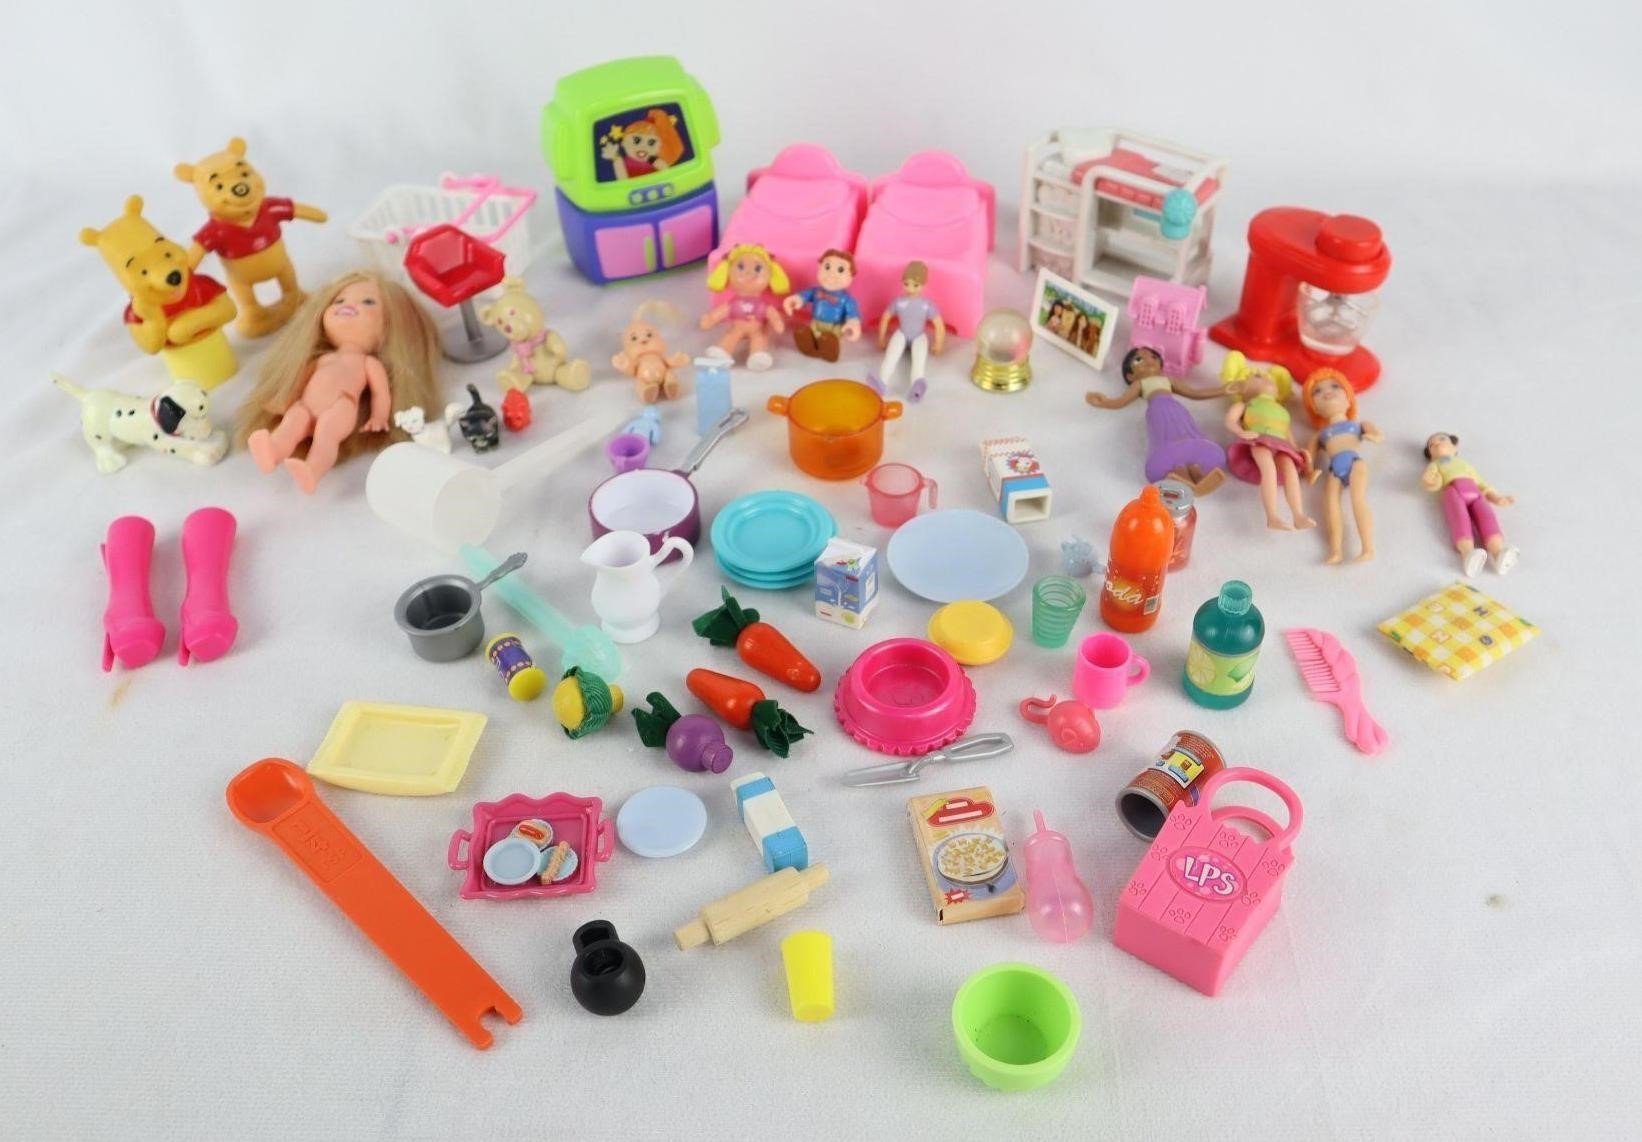 Miniature dolls 7 Furniture and More - Toys